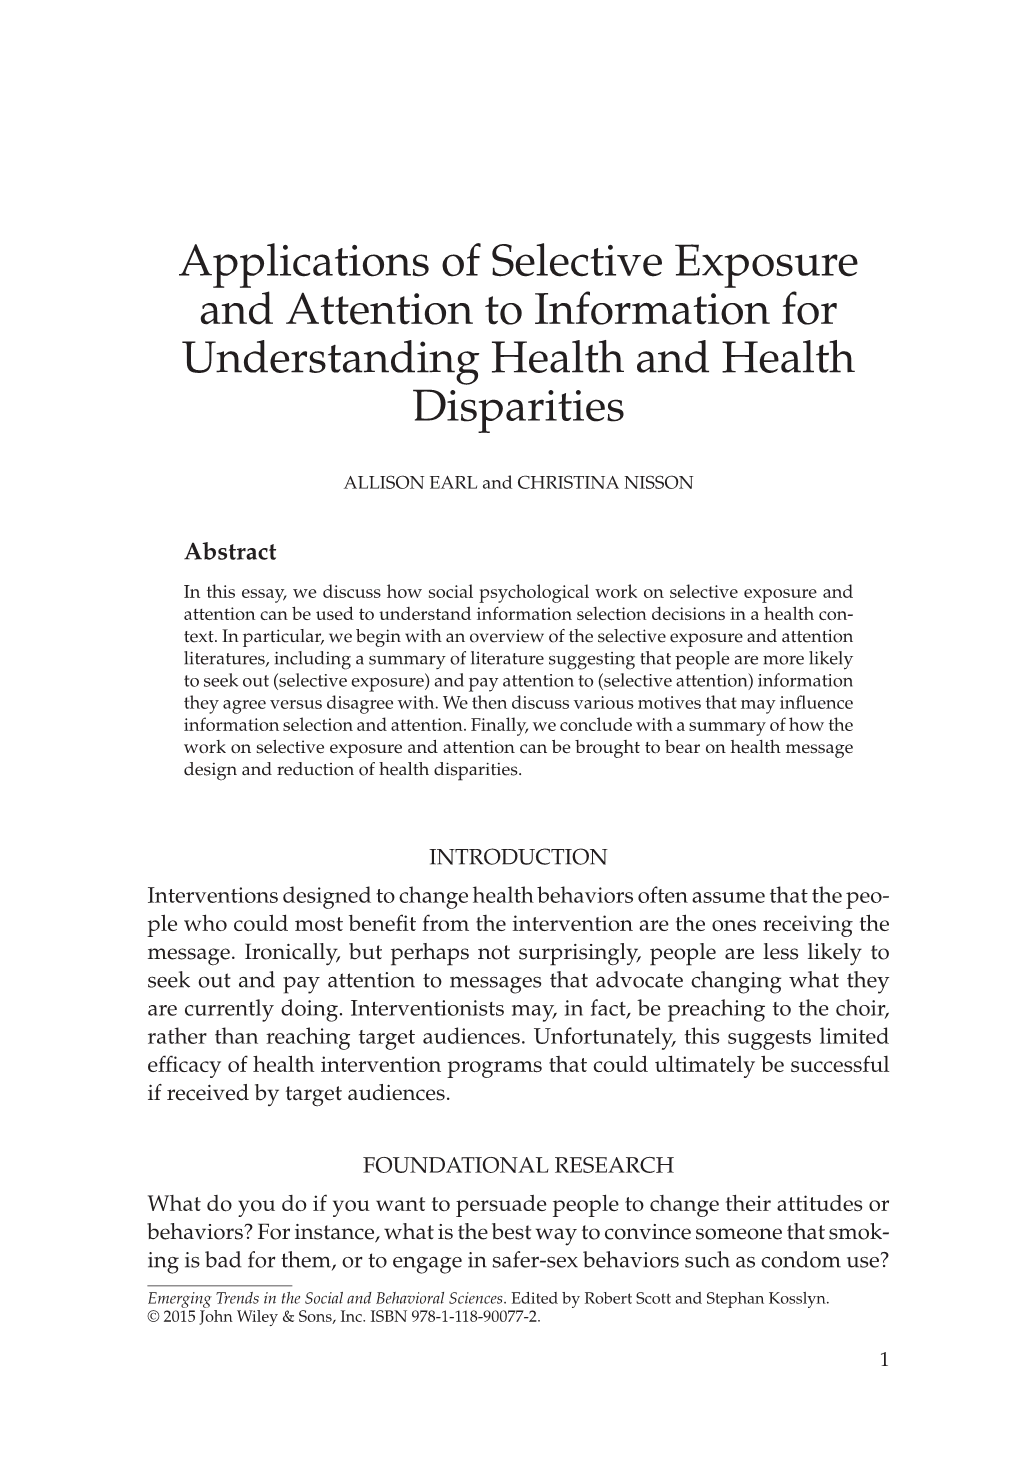 "Applications of Selective Exposure and Attention To